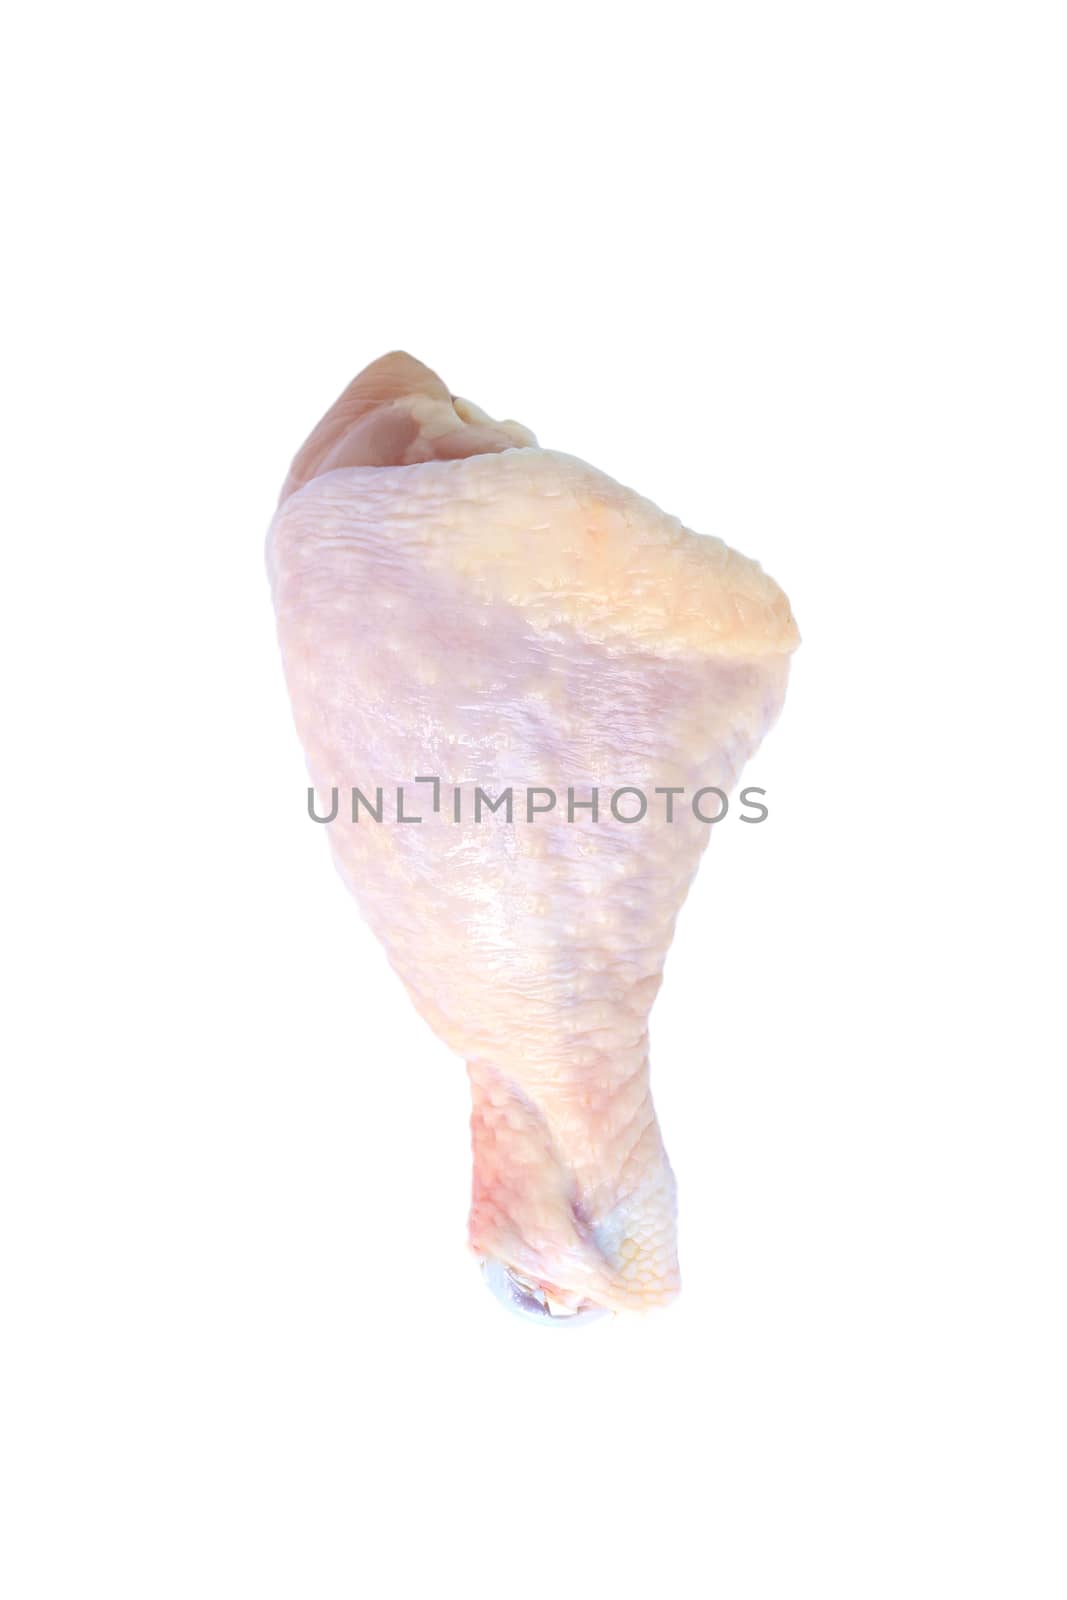 Image of Chicken Drumstick on a white background by yod67